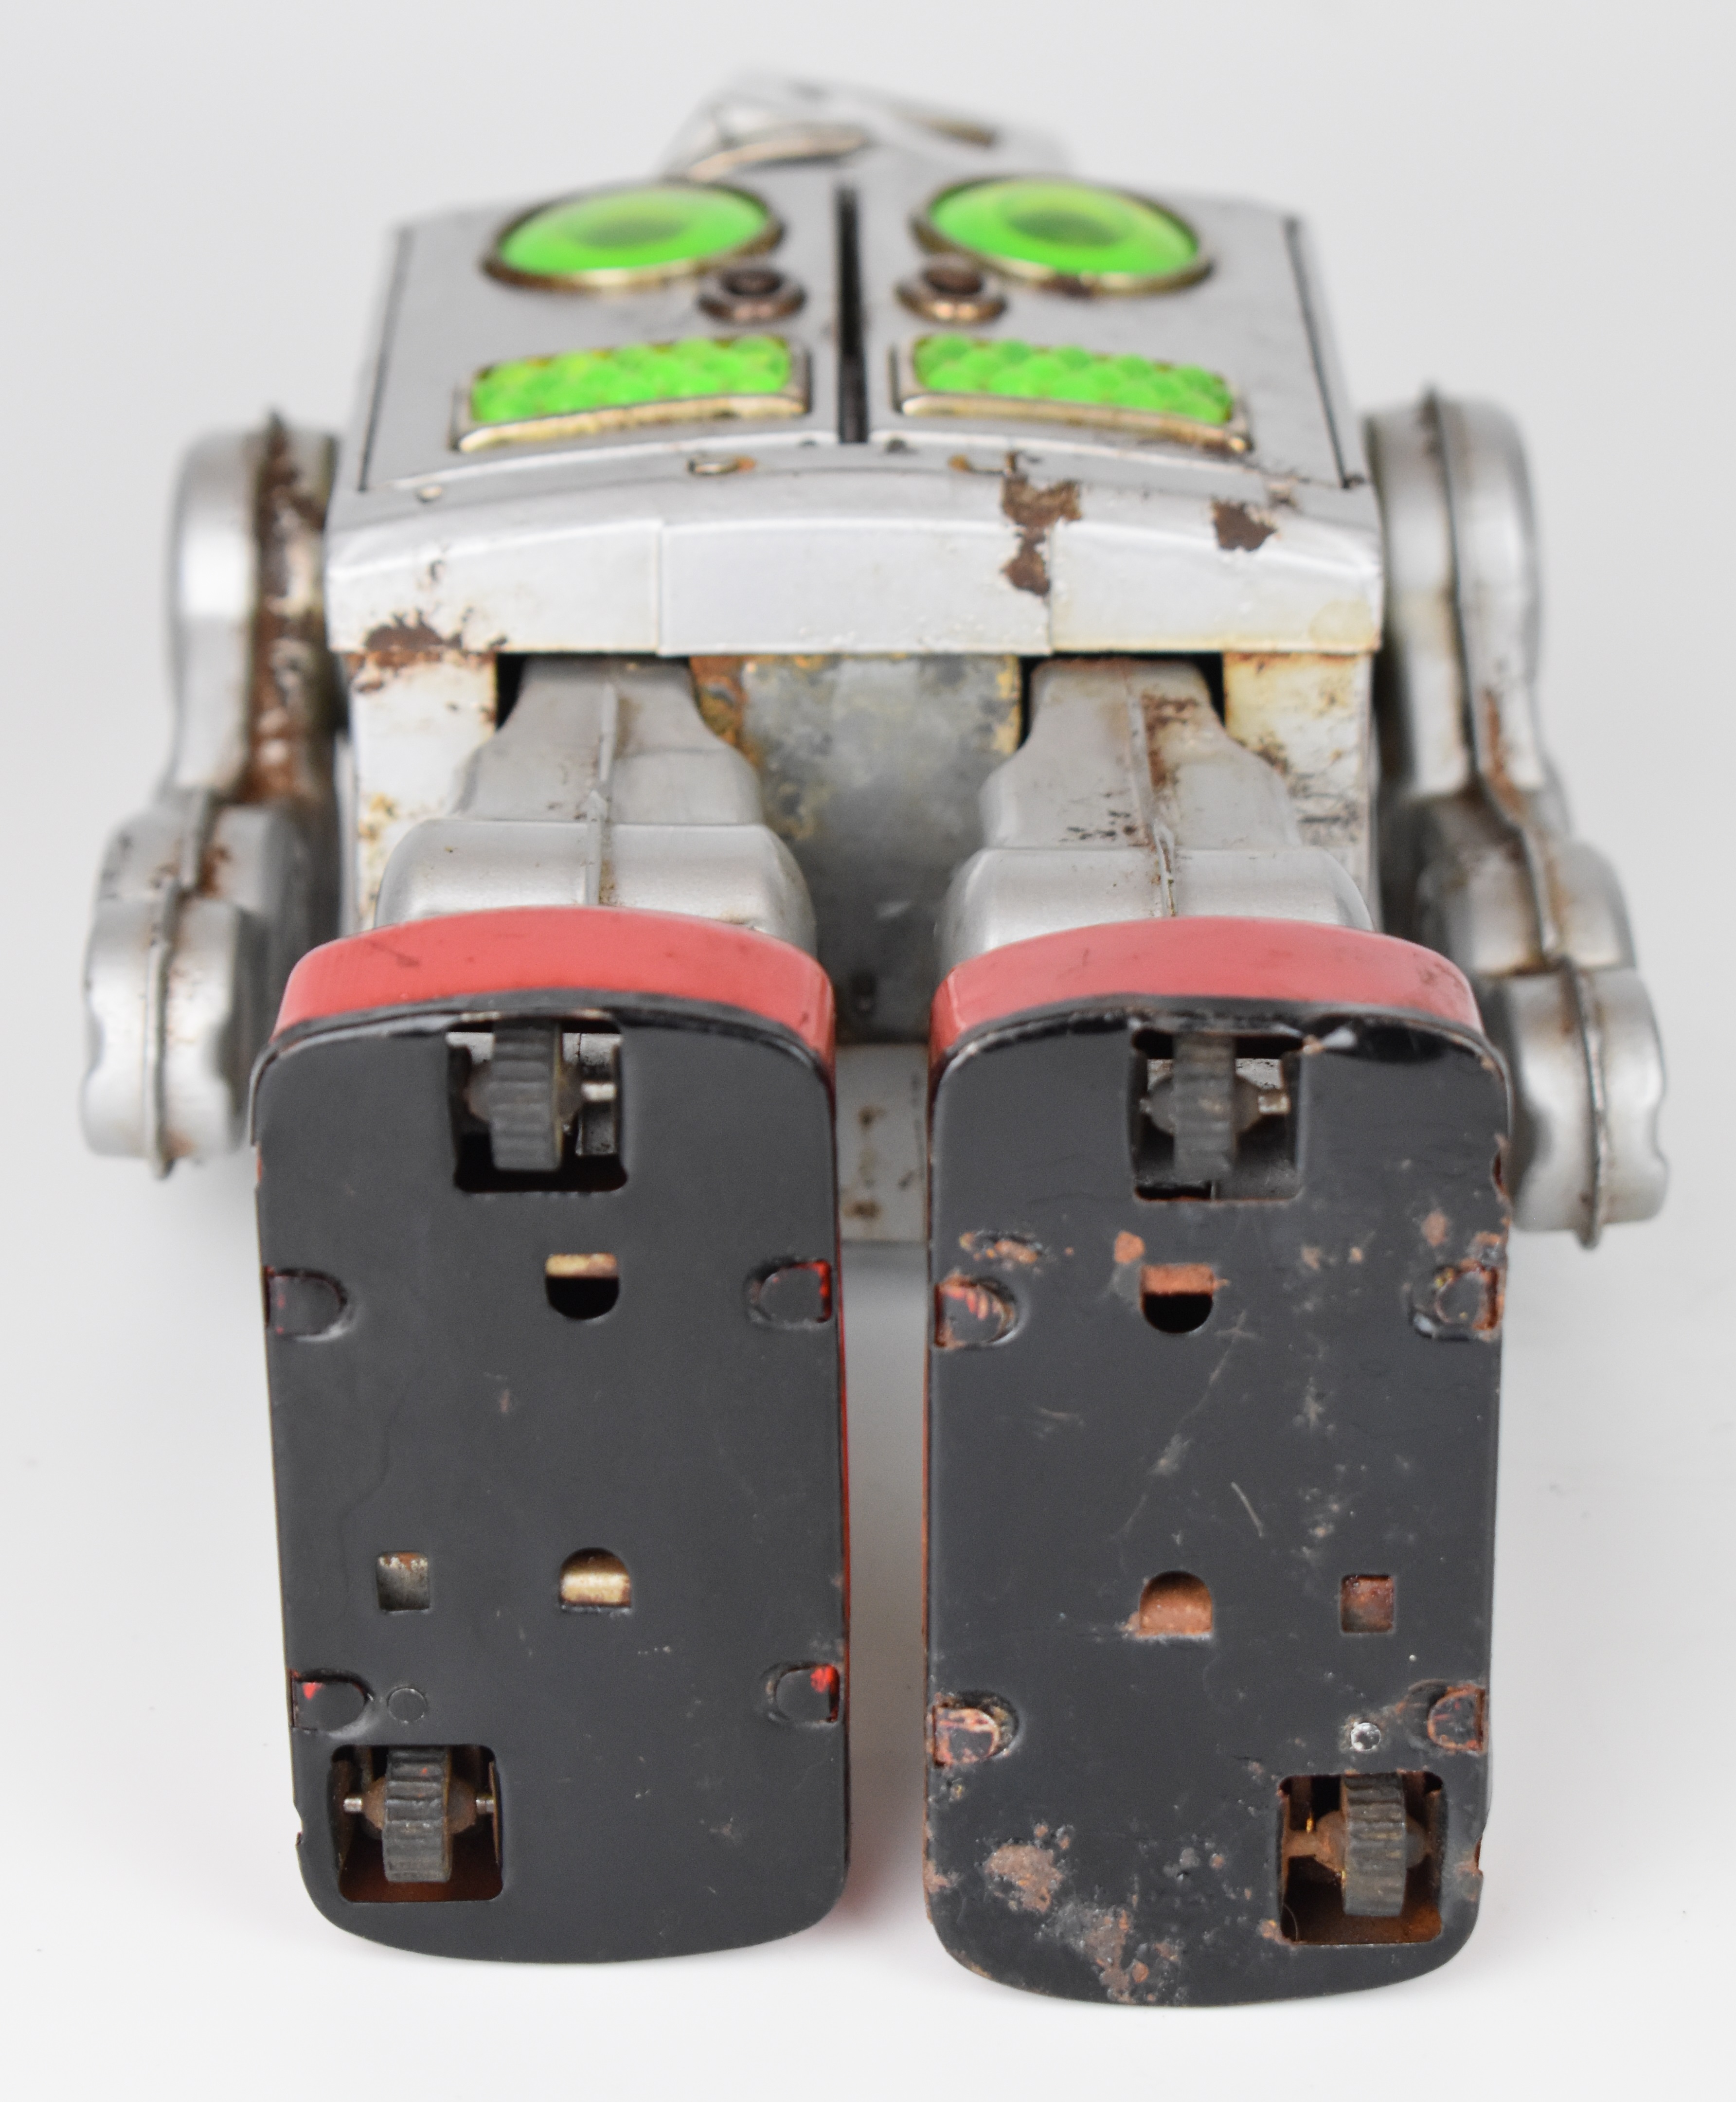 Japanese battery operated tinplate 'Attacking Martian' robot by Horikawa (SH Toys), height 29cm. - Image 6 of 7